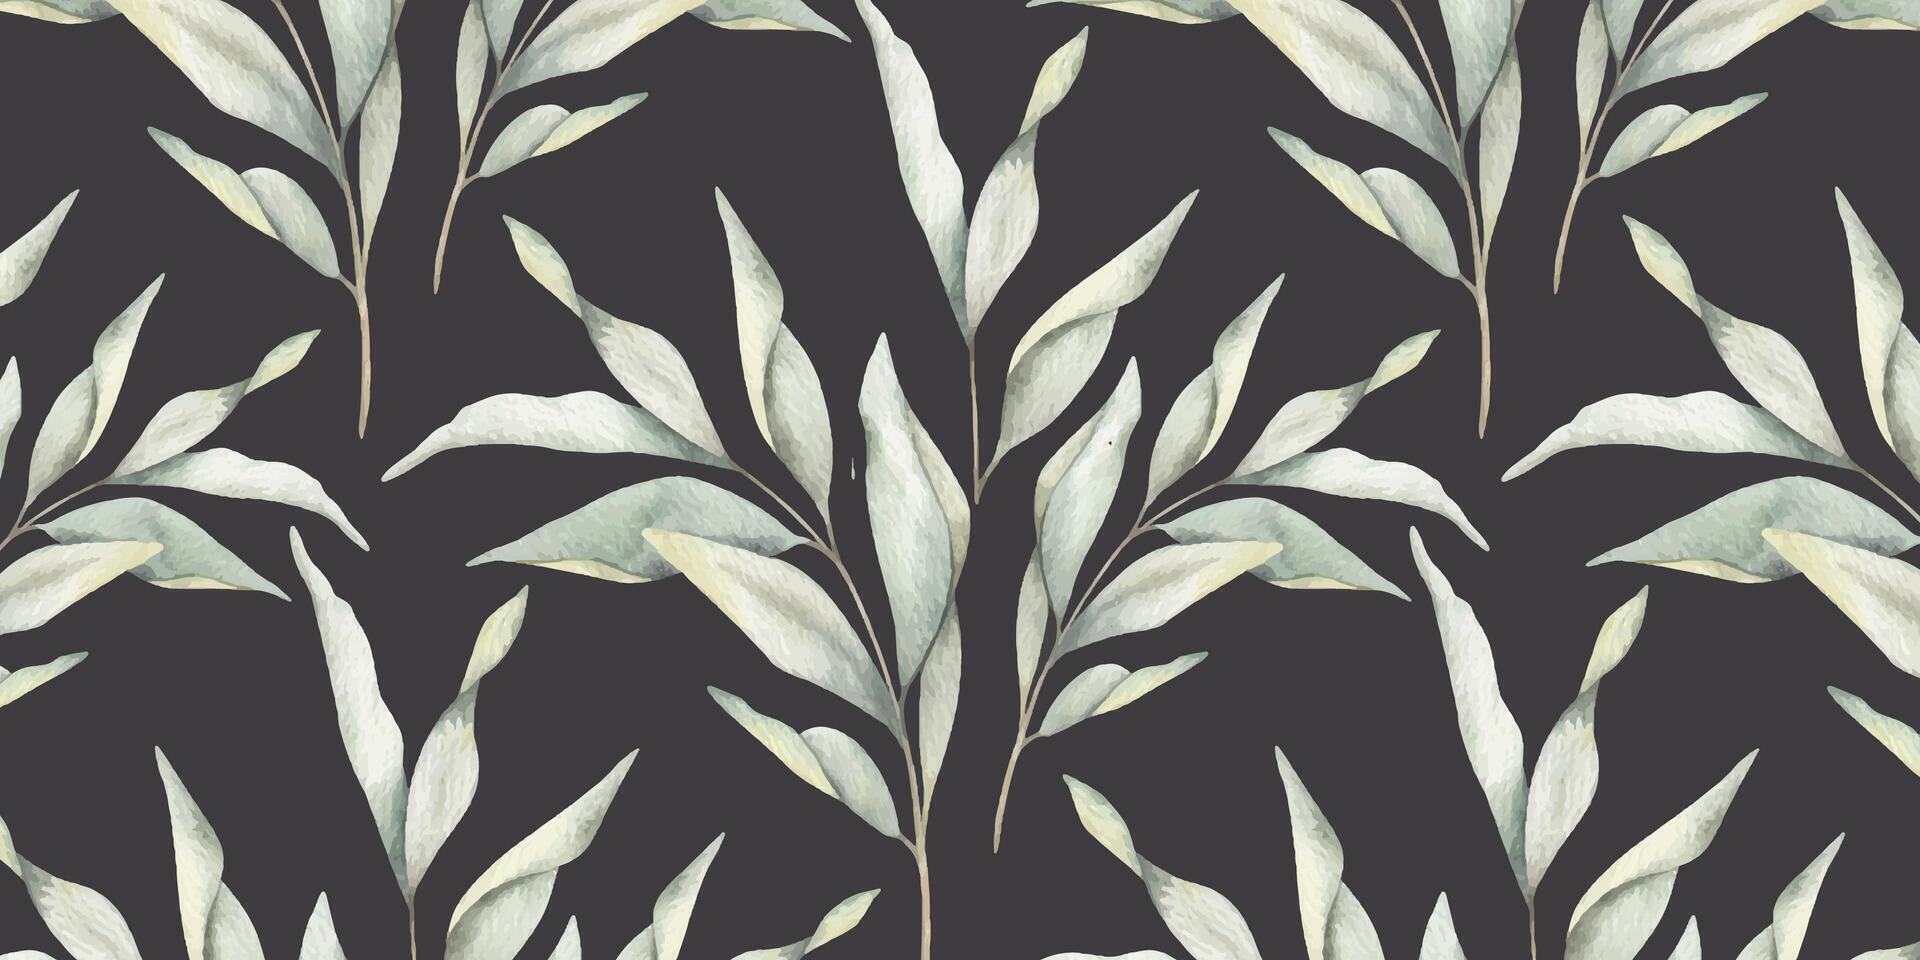 Green branches with leaves. Hand drawn watercolor seamless pattern of Twigs. Summer floral background for wedding design, textiles, wrapping paper, scrapbooking vector